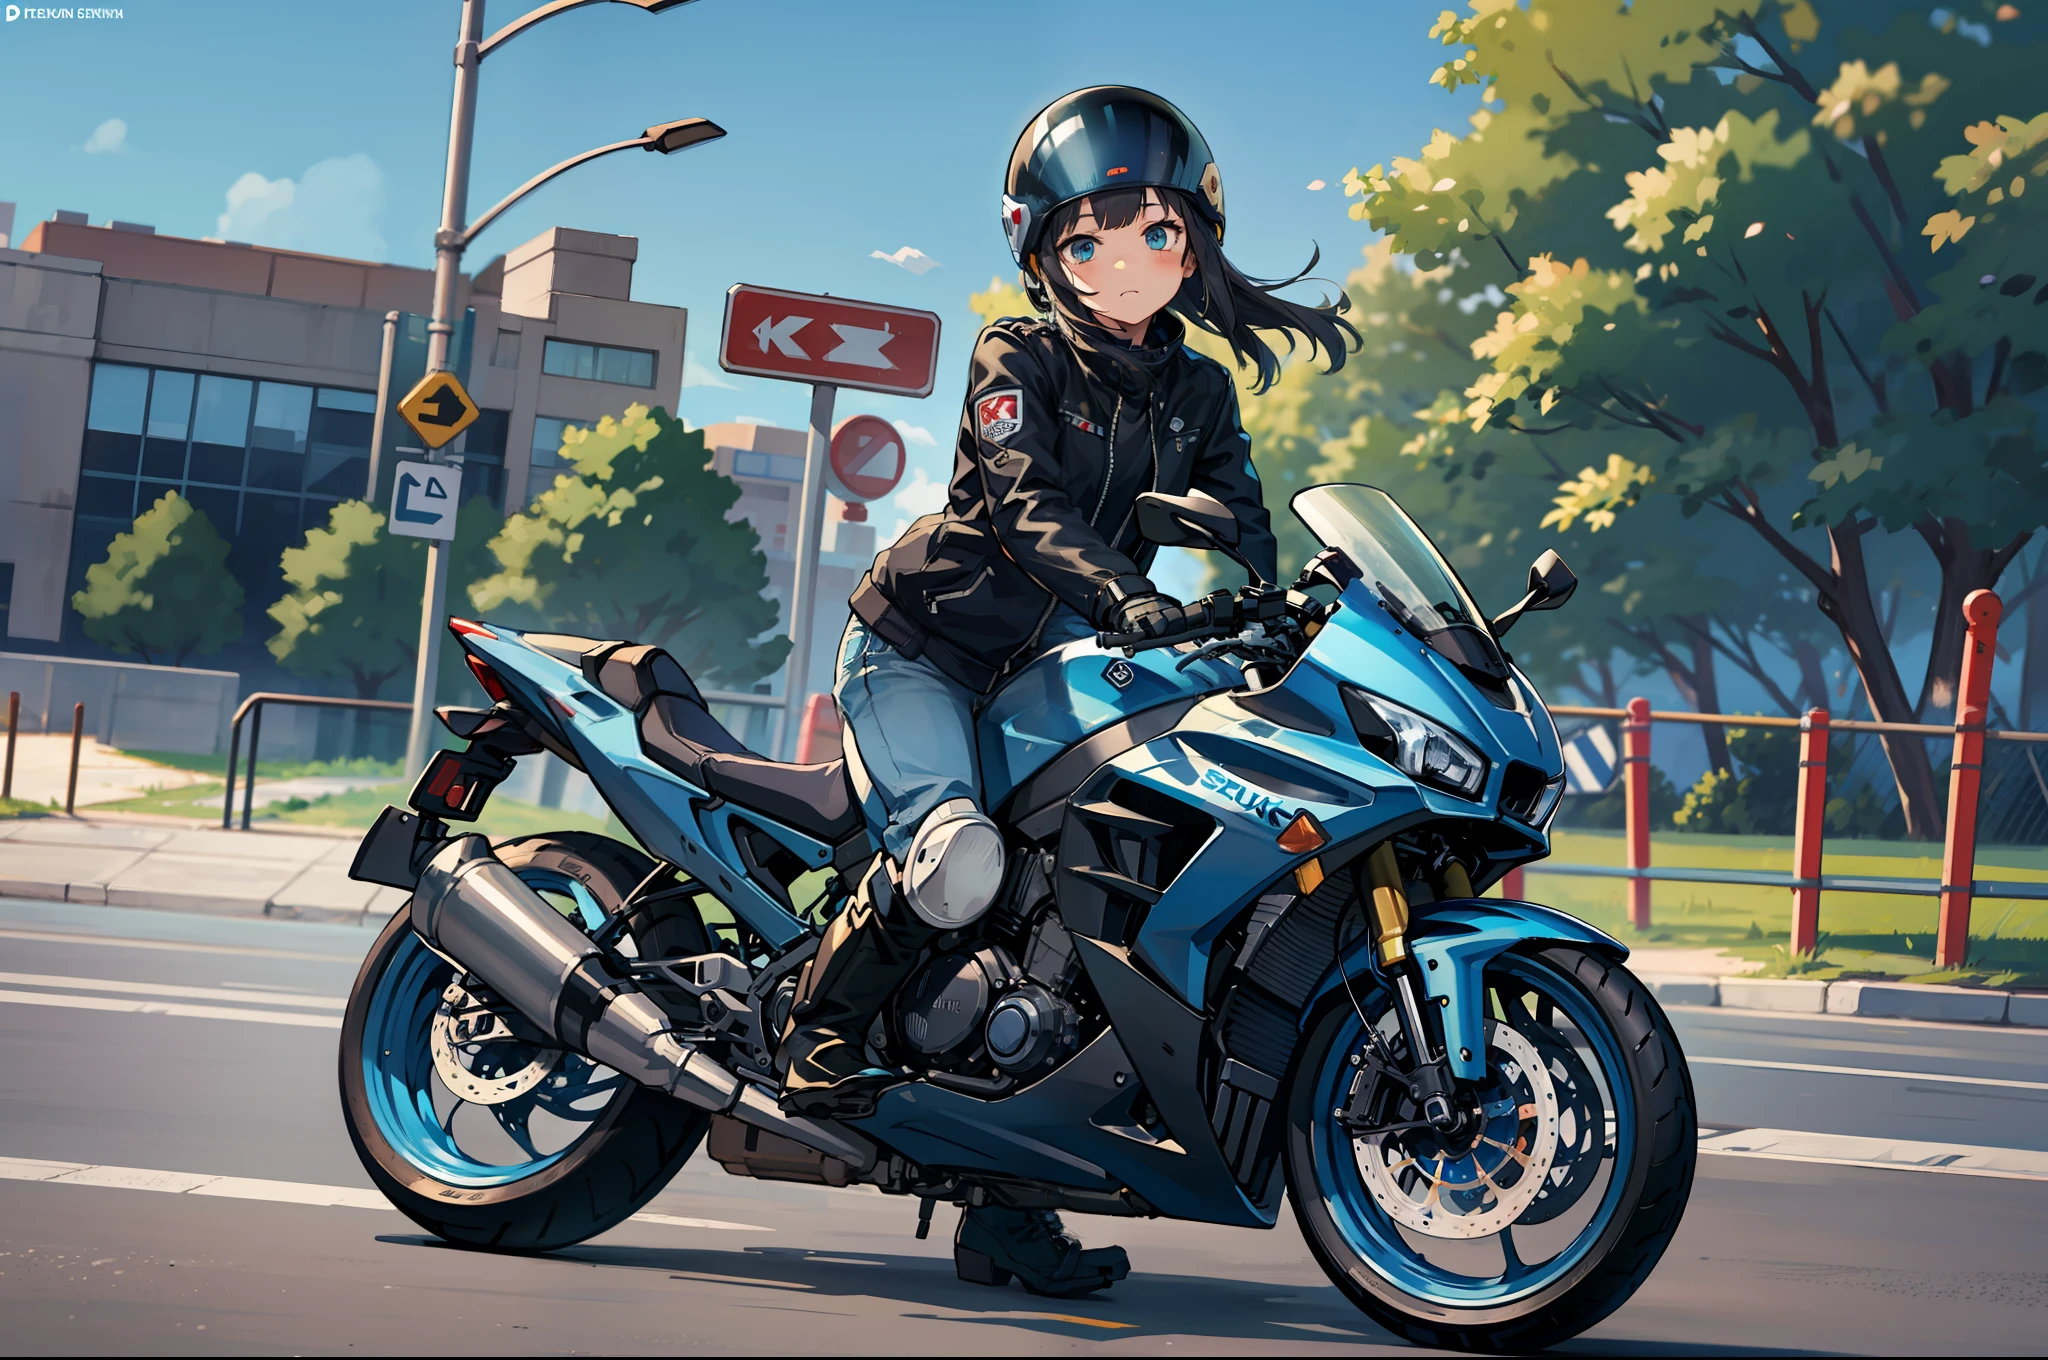 Beautiful highschool girl、touring、Holding and holding a full-face helmet、Riding jacket、Damaged jeans、Bike Gloves、Engineer Boots、roadside station、arafed blue motorcycle parked on the side of the road, futuristic suzuki, with a blue background, Blue, yoshimura exhaust, Sky Blue, Easy, motorcycle, motorcycle, Motorcycles,riding, full device, blue colored,